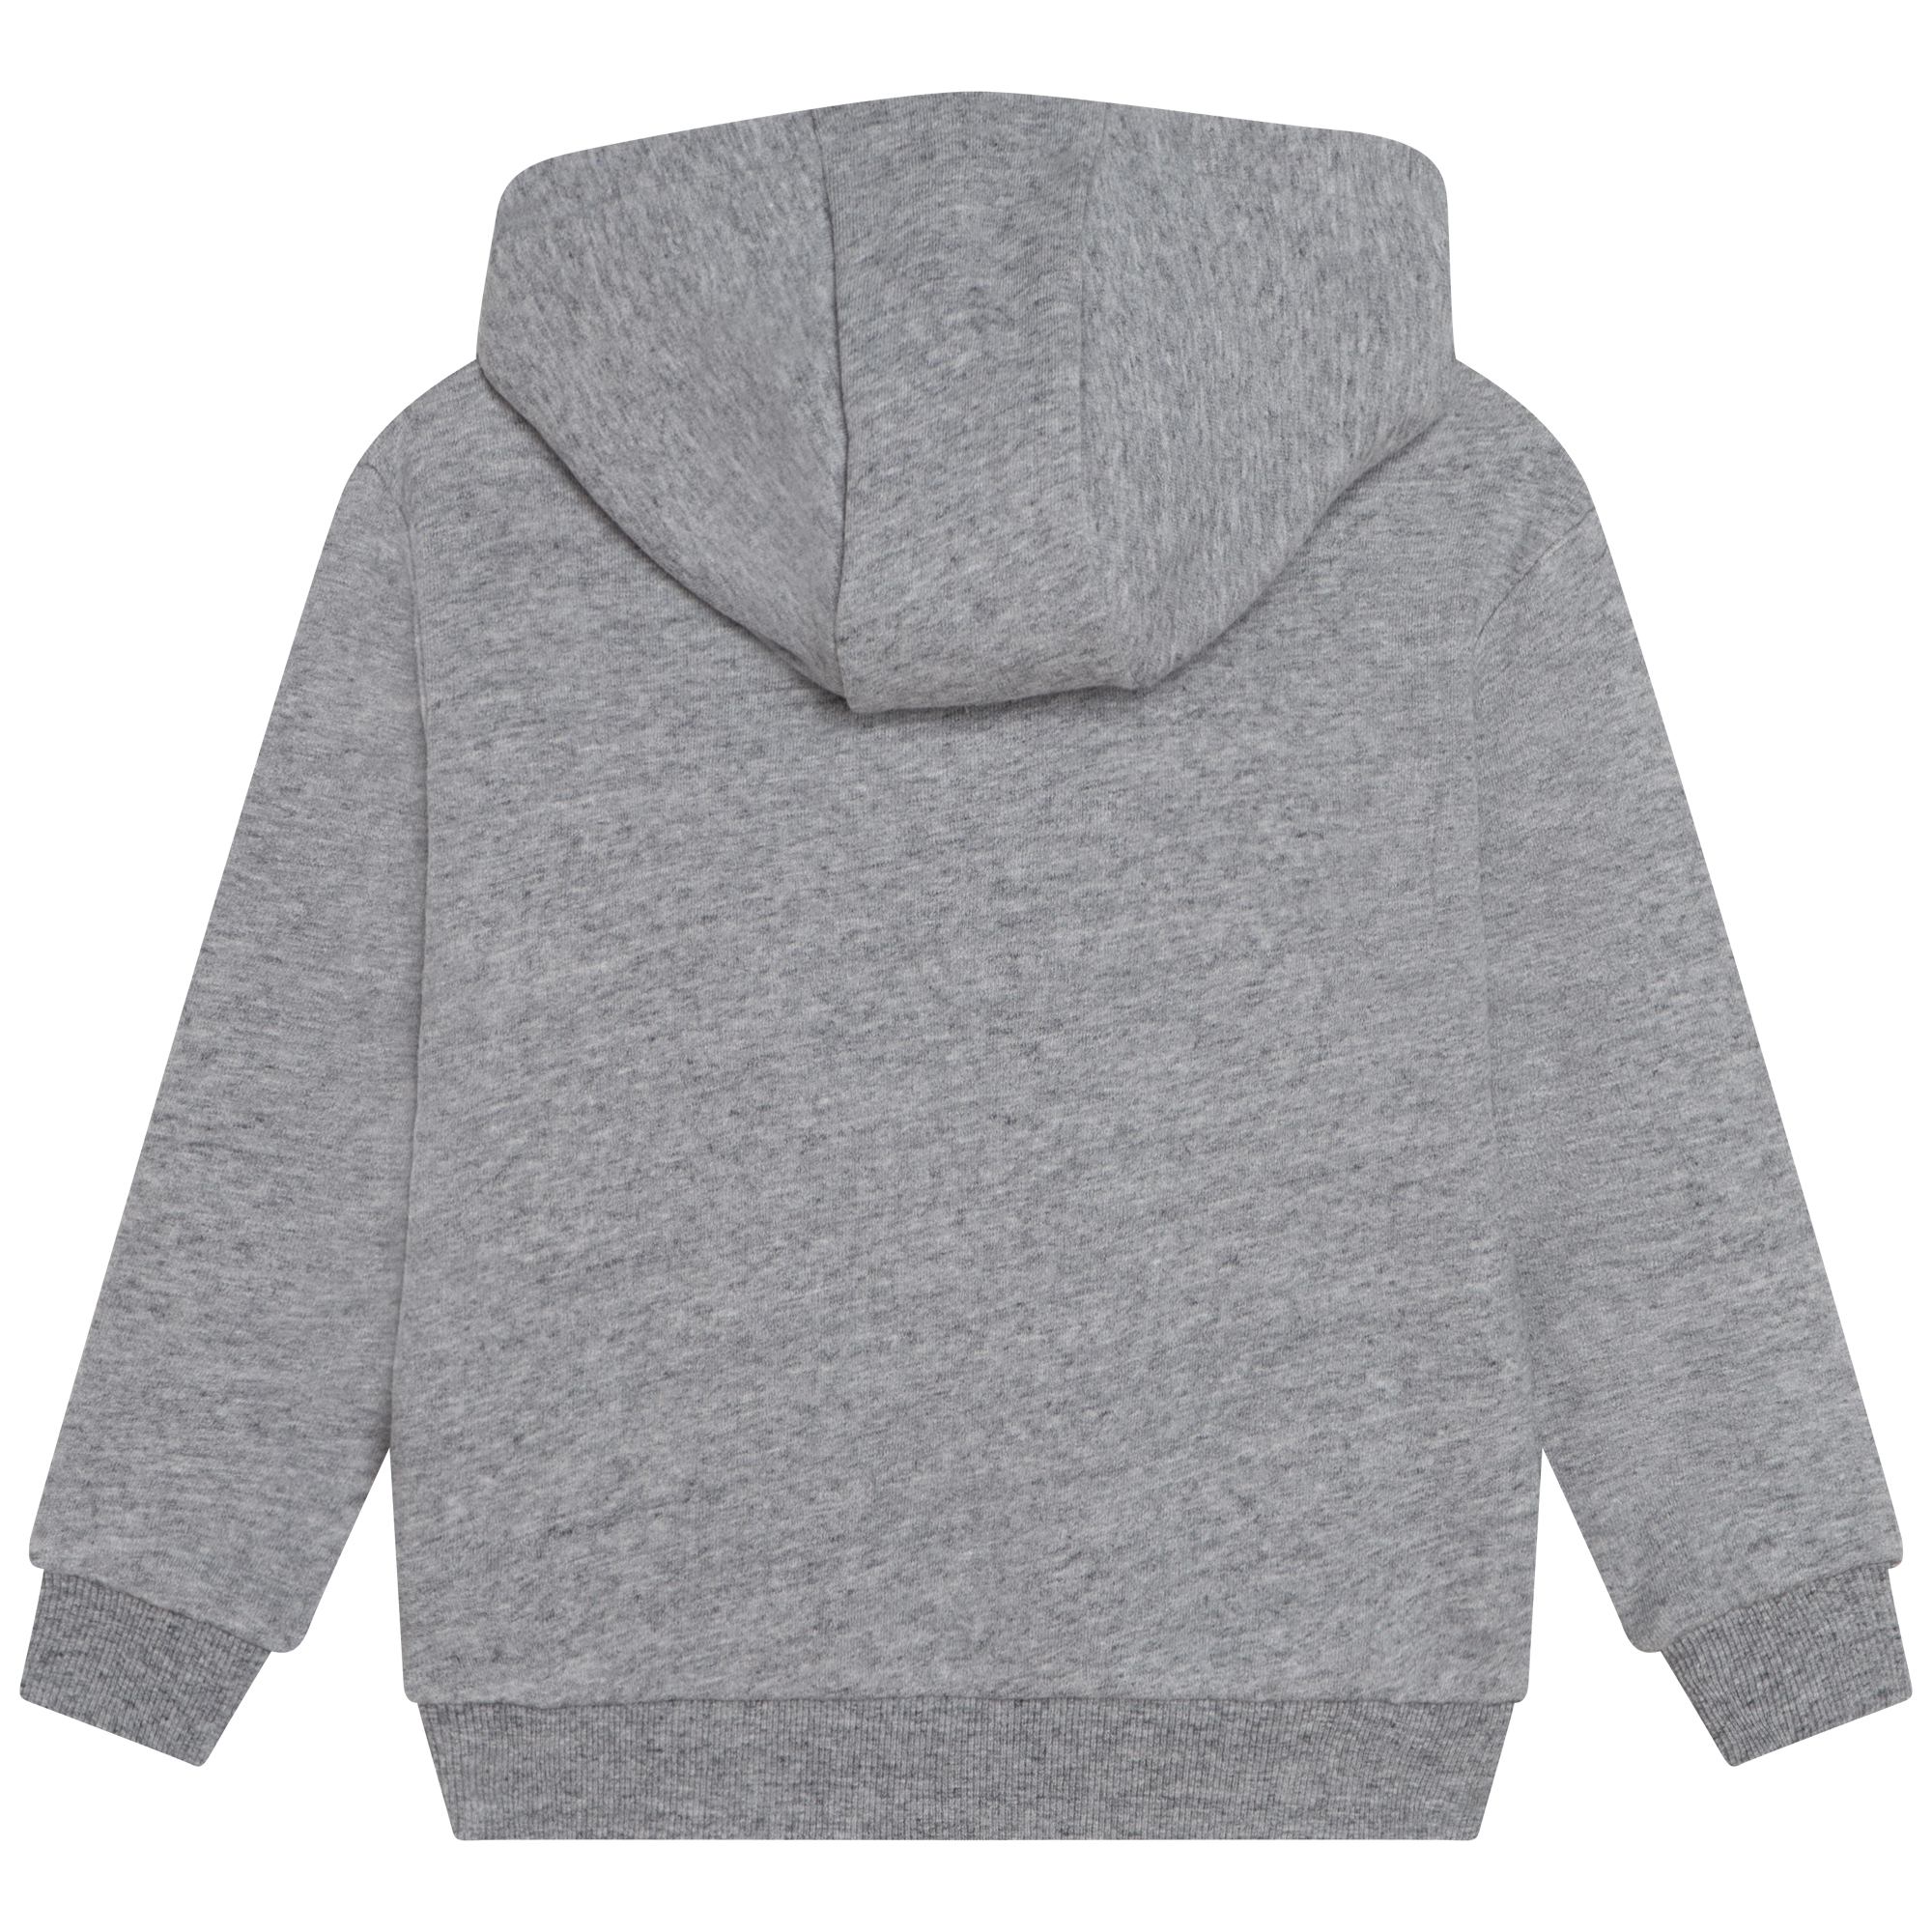 Cotton hooded sweatshirt MARC JACOBS for BOY